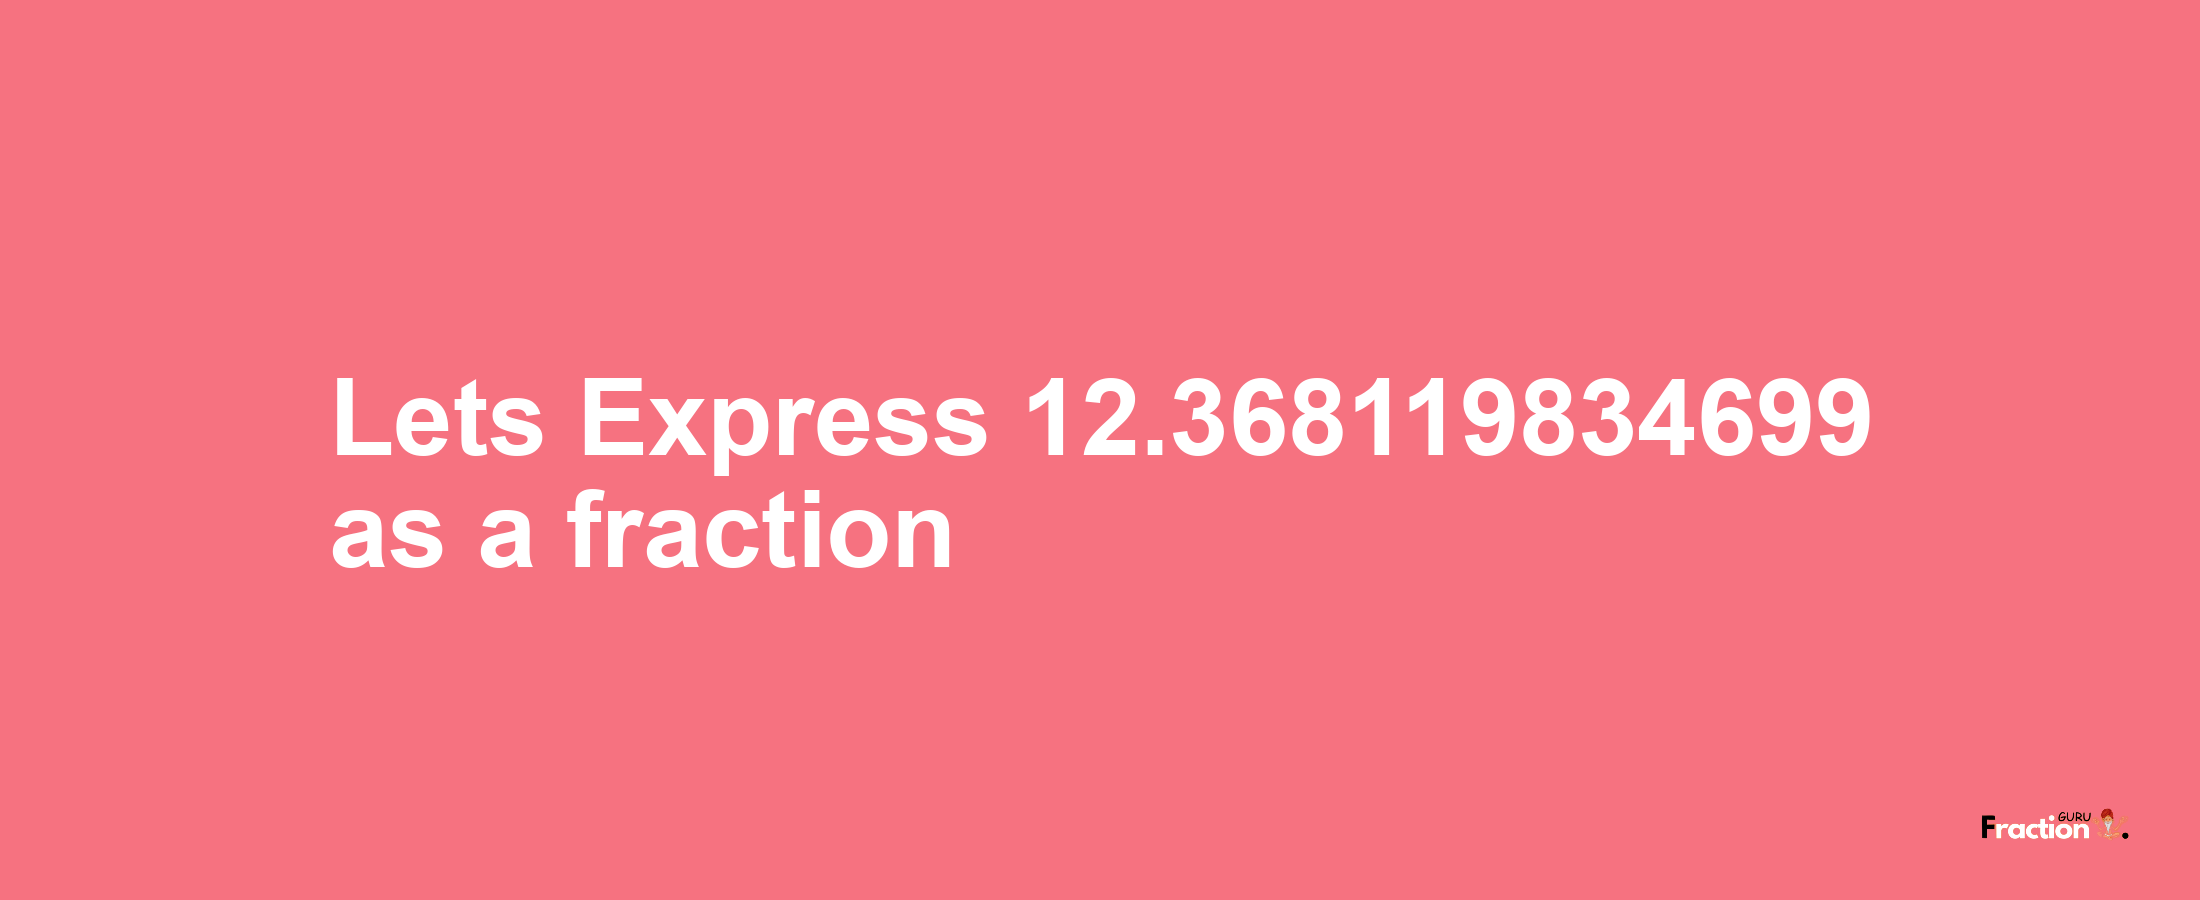 Lets Express 12.368119834699 as afraction